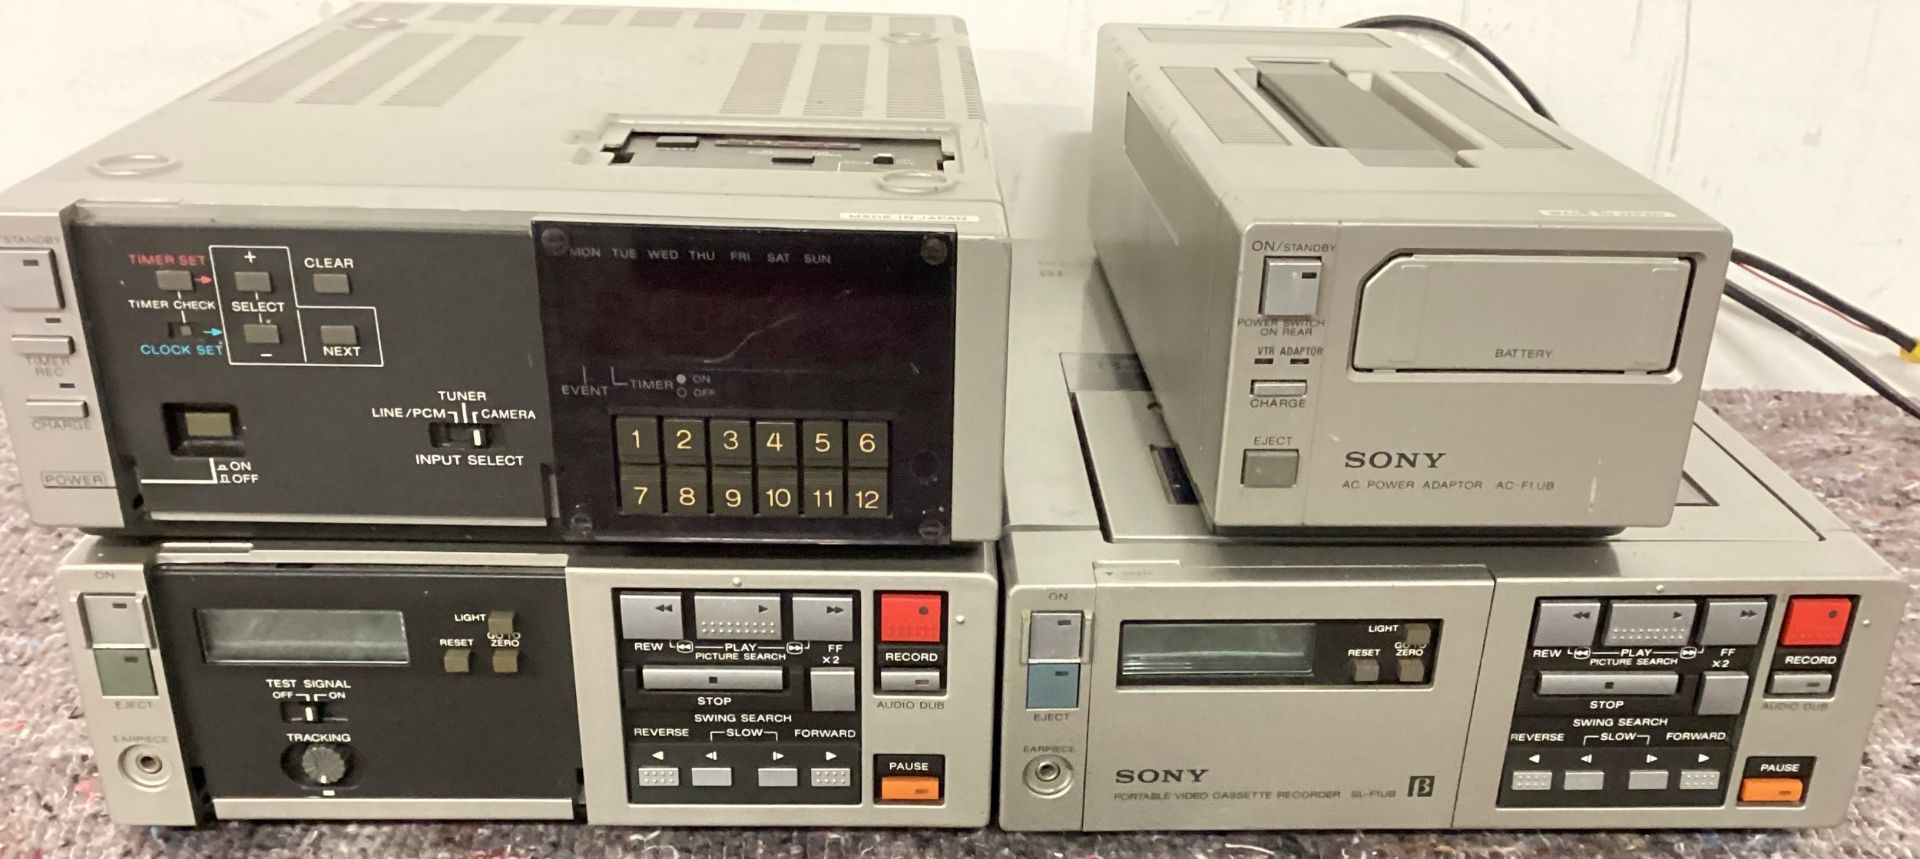 SONY BETAMAX VIDEO CASSETTE PLAYERS WITH ACCESSORIES. We have 2 x SL-F1UB cassette recorders along